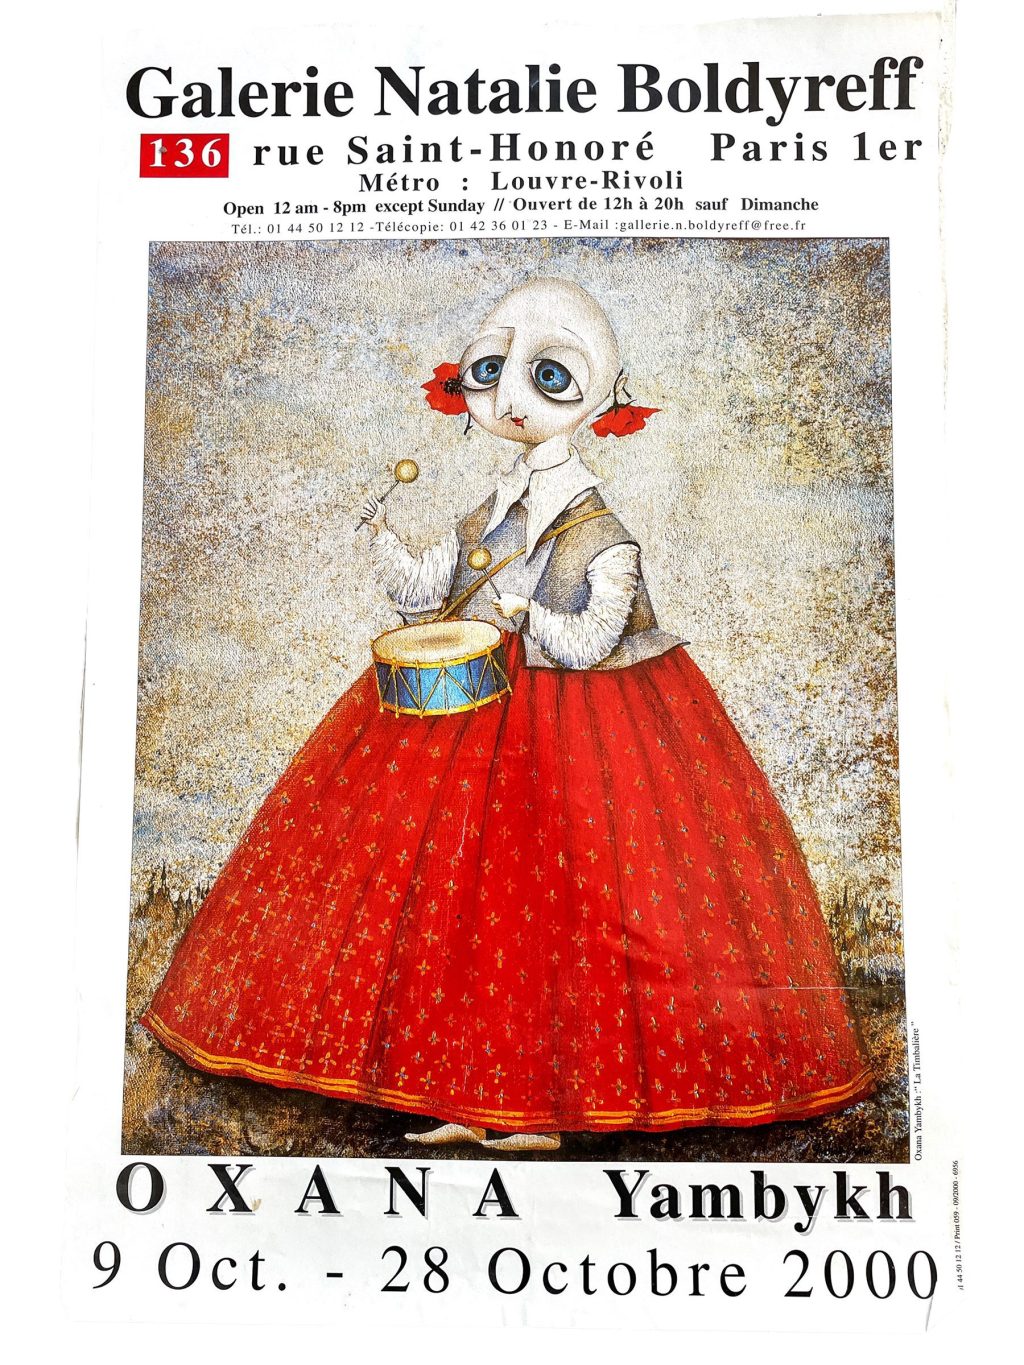 Vintage French Oxana Yambykh Galerie Natalie Boldyreff Paris Gallery Original Exhibition Poster Wall Decor Painting Display c2000 / EVE